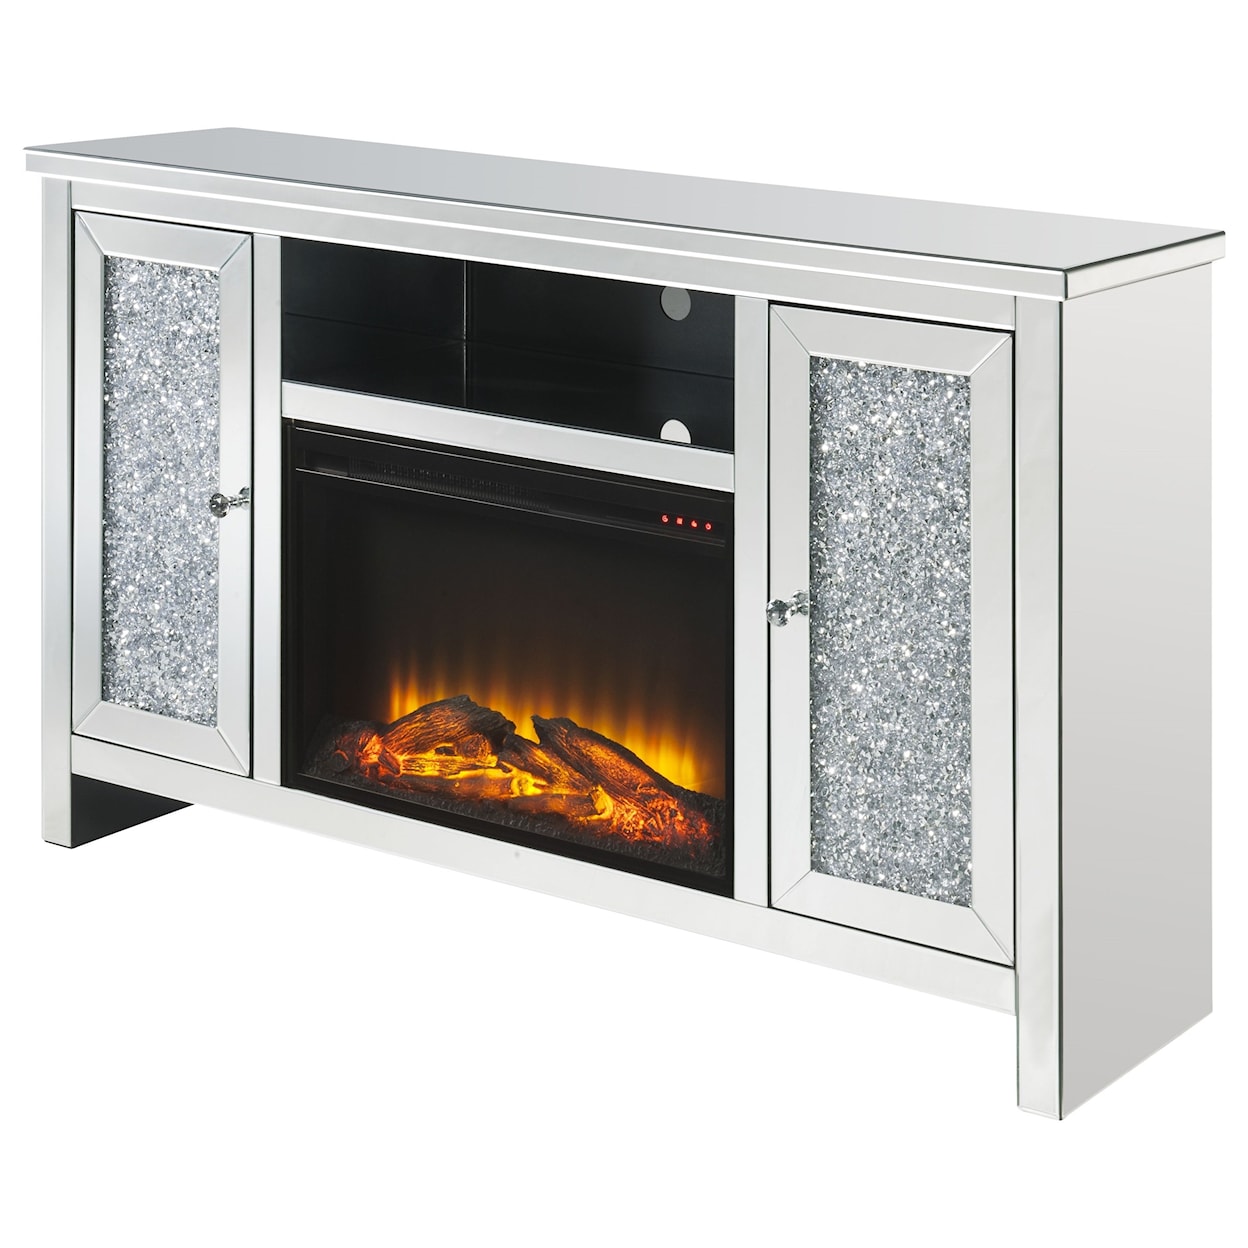 Acme Furniture Noralie BLING FIREPLACE  59" TV STAND |